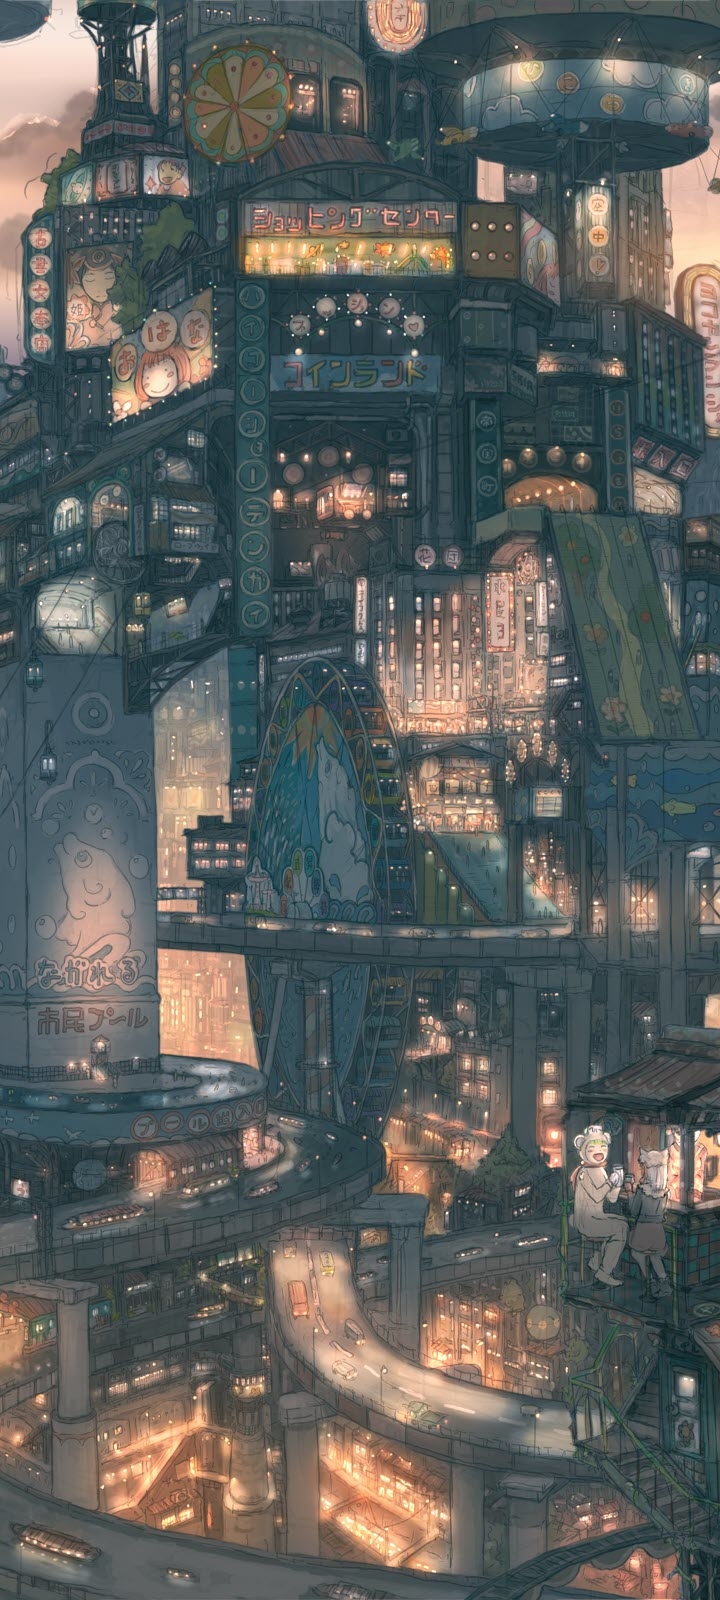 Anime City Phone Wallpaper by ソメイよしのり - Mobile Abyss